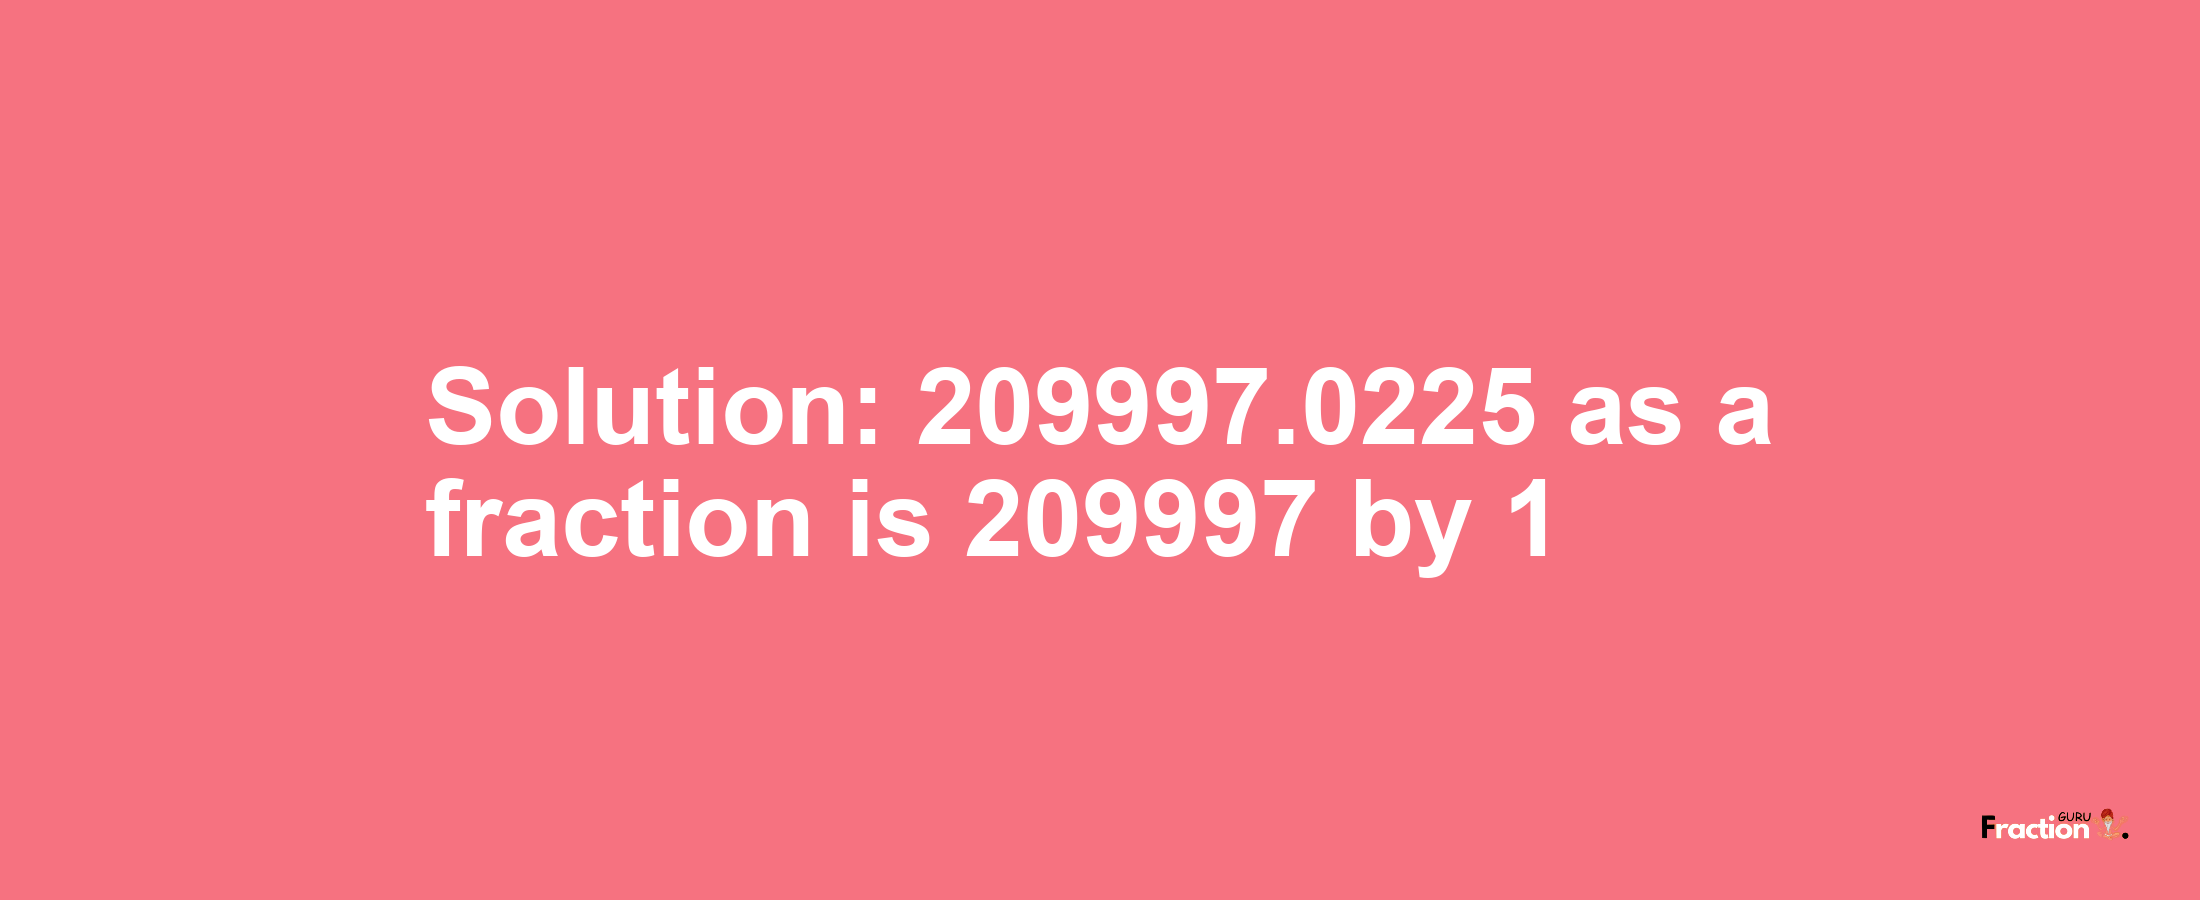 Solution:209997.0225 as a fraction is 209997/1